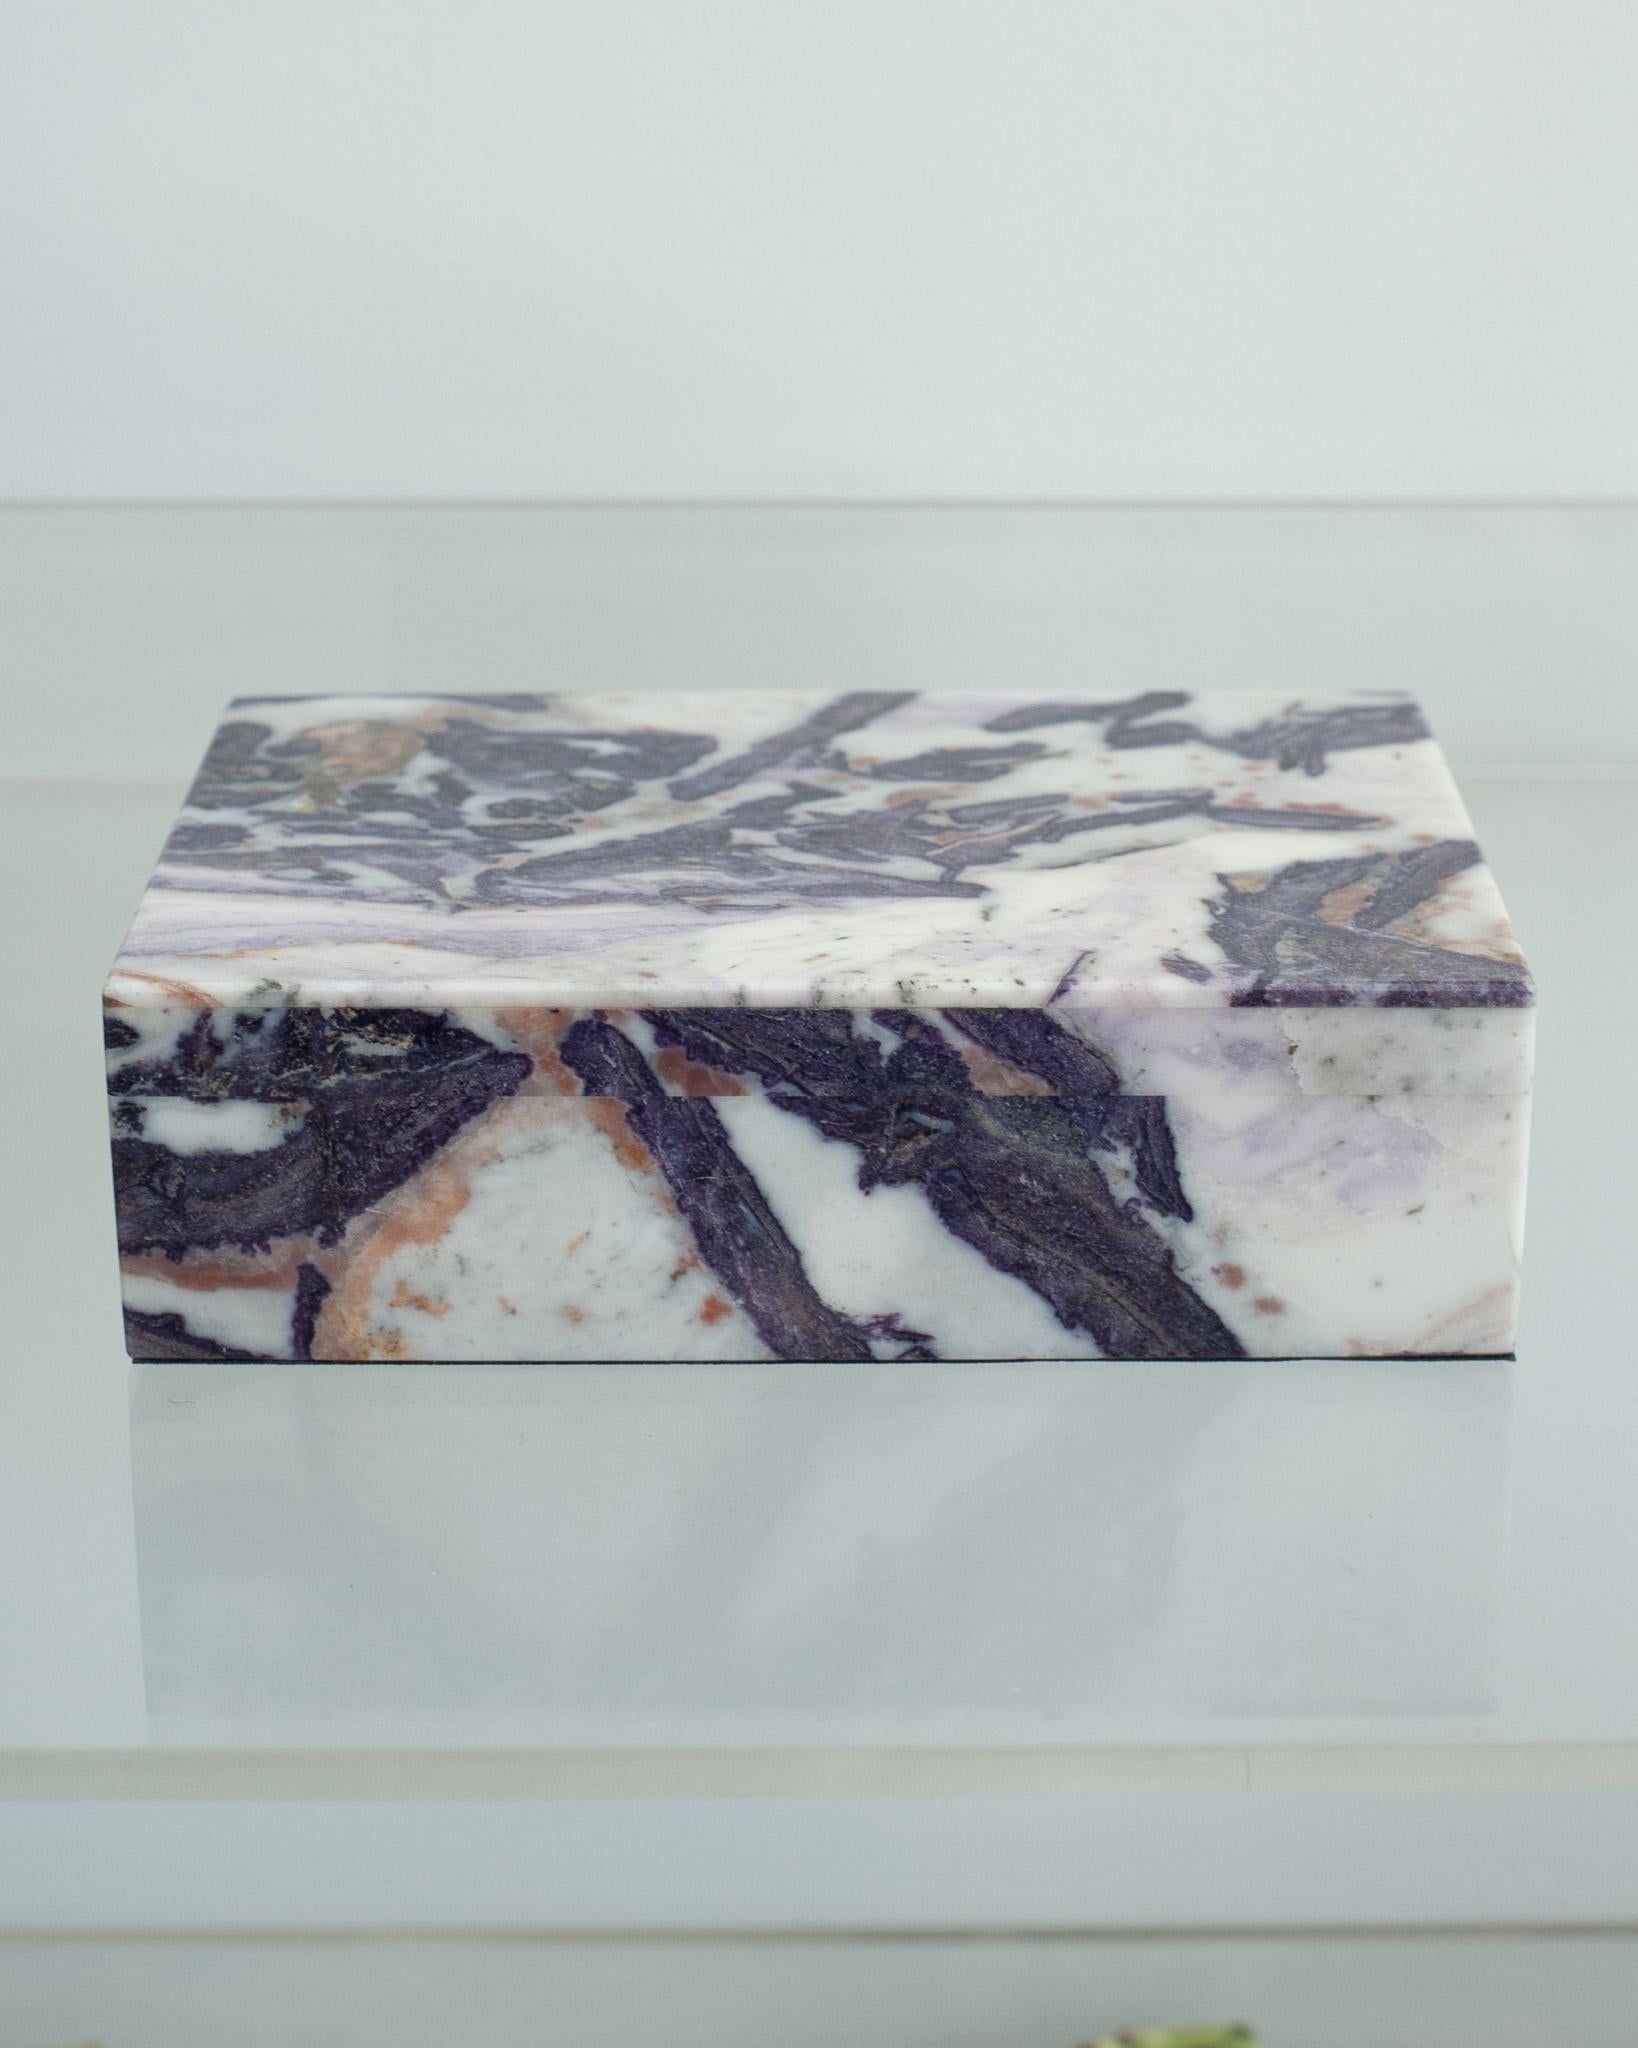 Invite healing energy into your home with this exquisite purple opal box. This box is beautifully made with a hinged lid and expert construction. Lined in black velvet with black marble trims. Finished to a high polish to show off the natural beauty